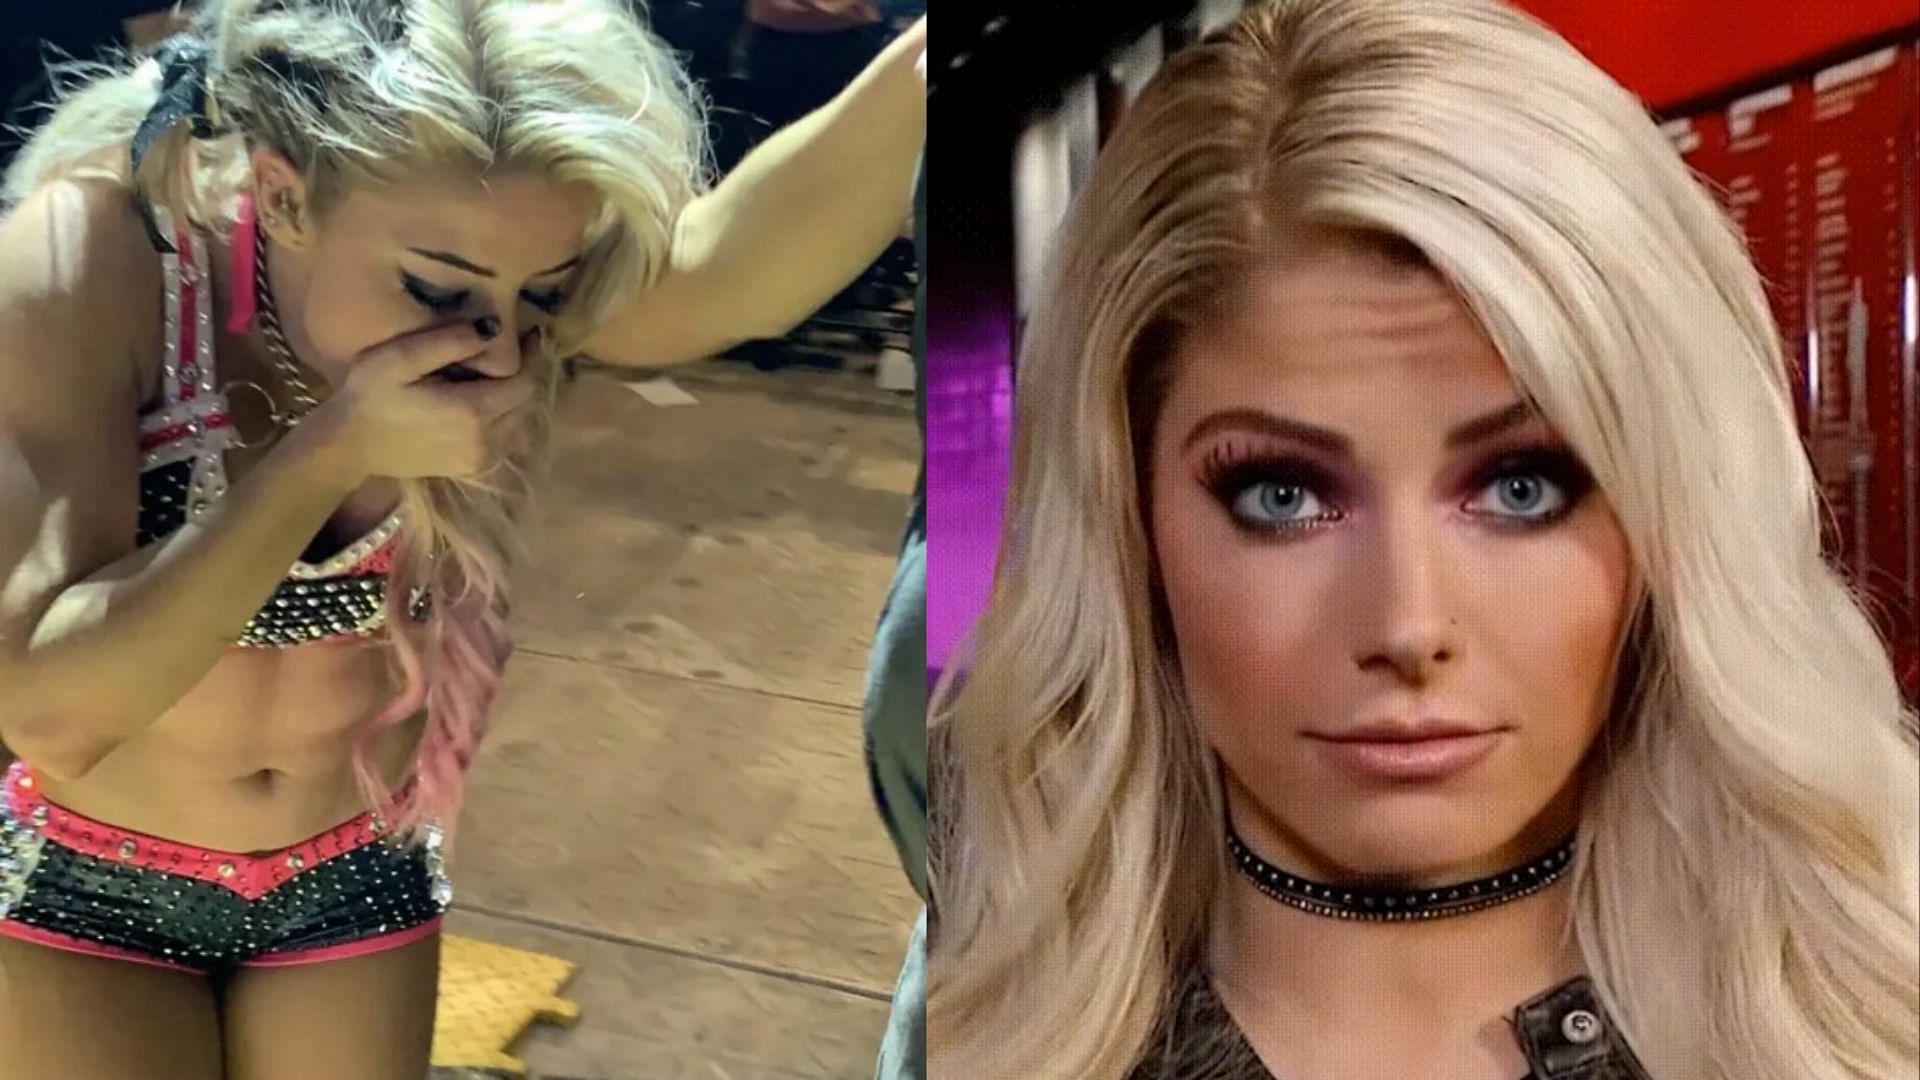 Alexa Bliss has shown herself capable of anything in WWE